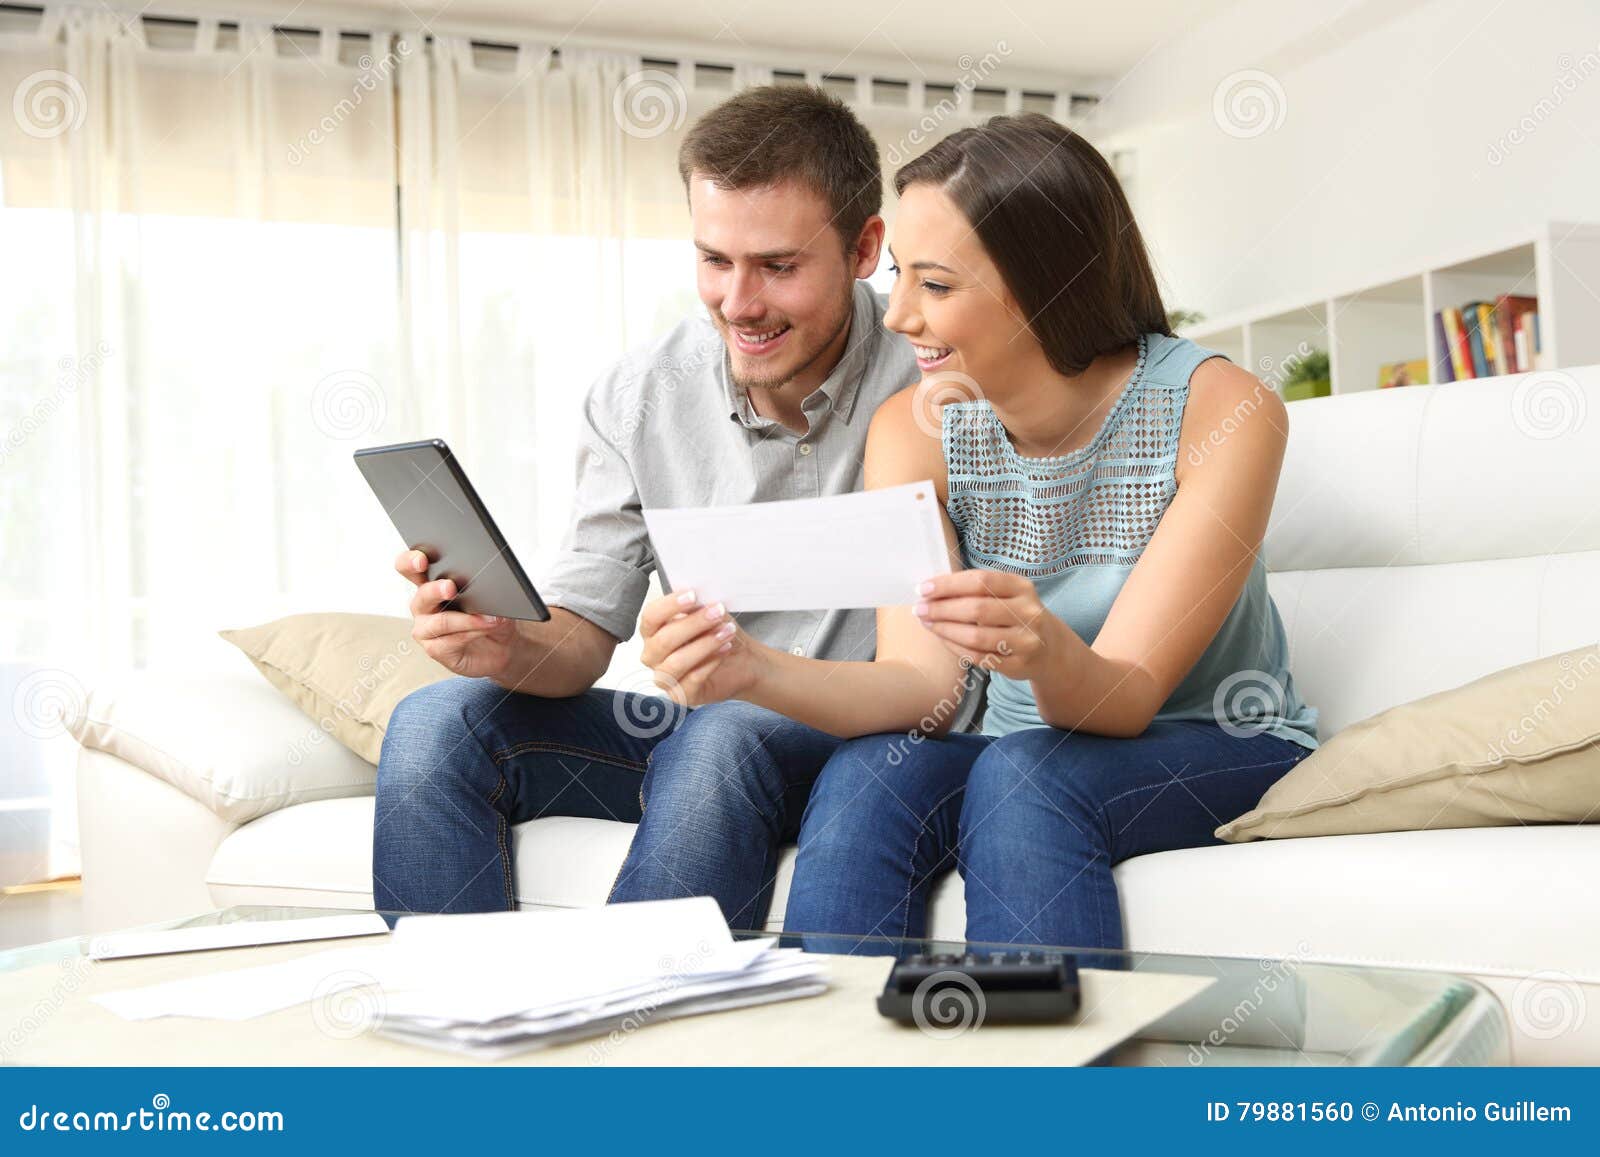 happy couple checking bank account online